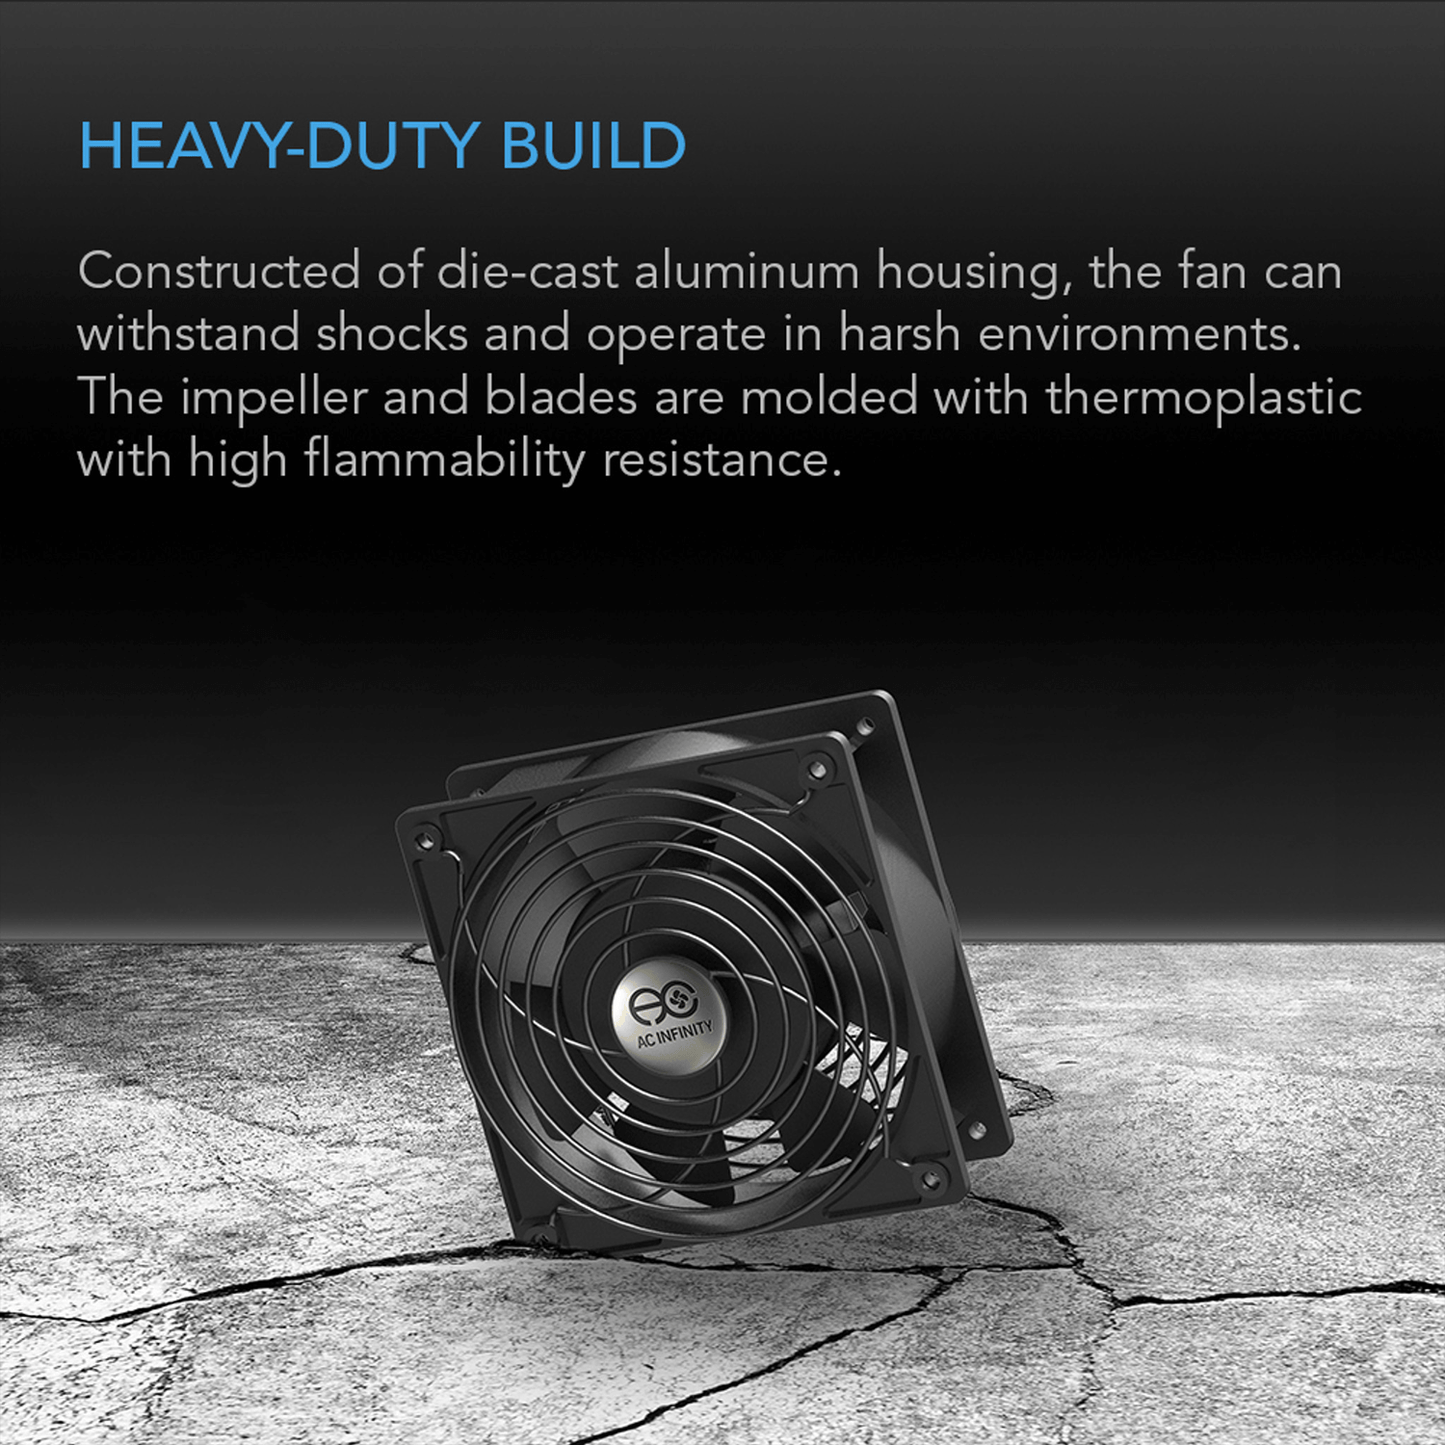 AC Infinity AXIAL 9238, Muffin 120V AC Cooling Fan, 92mm x 92mm x 38mm HS9238A-X Climate Control 854759004266